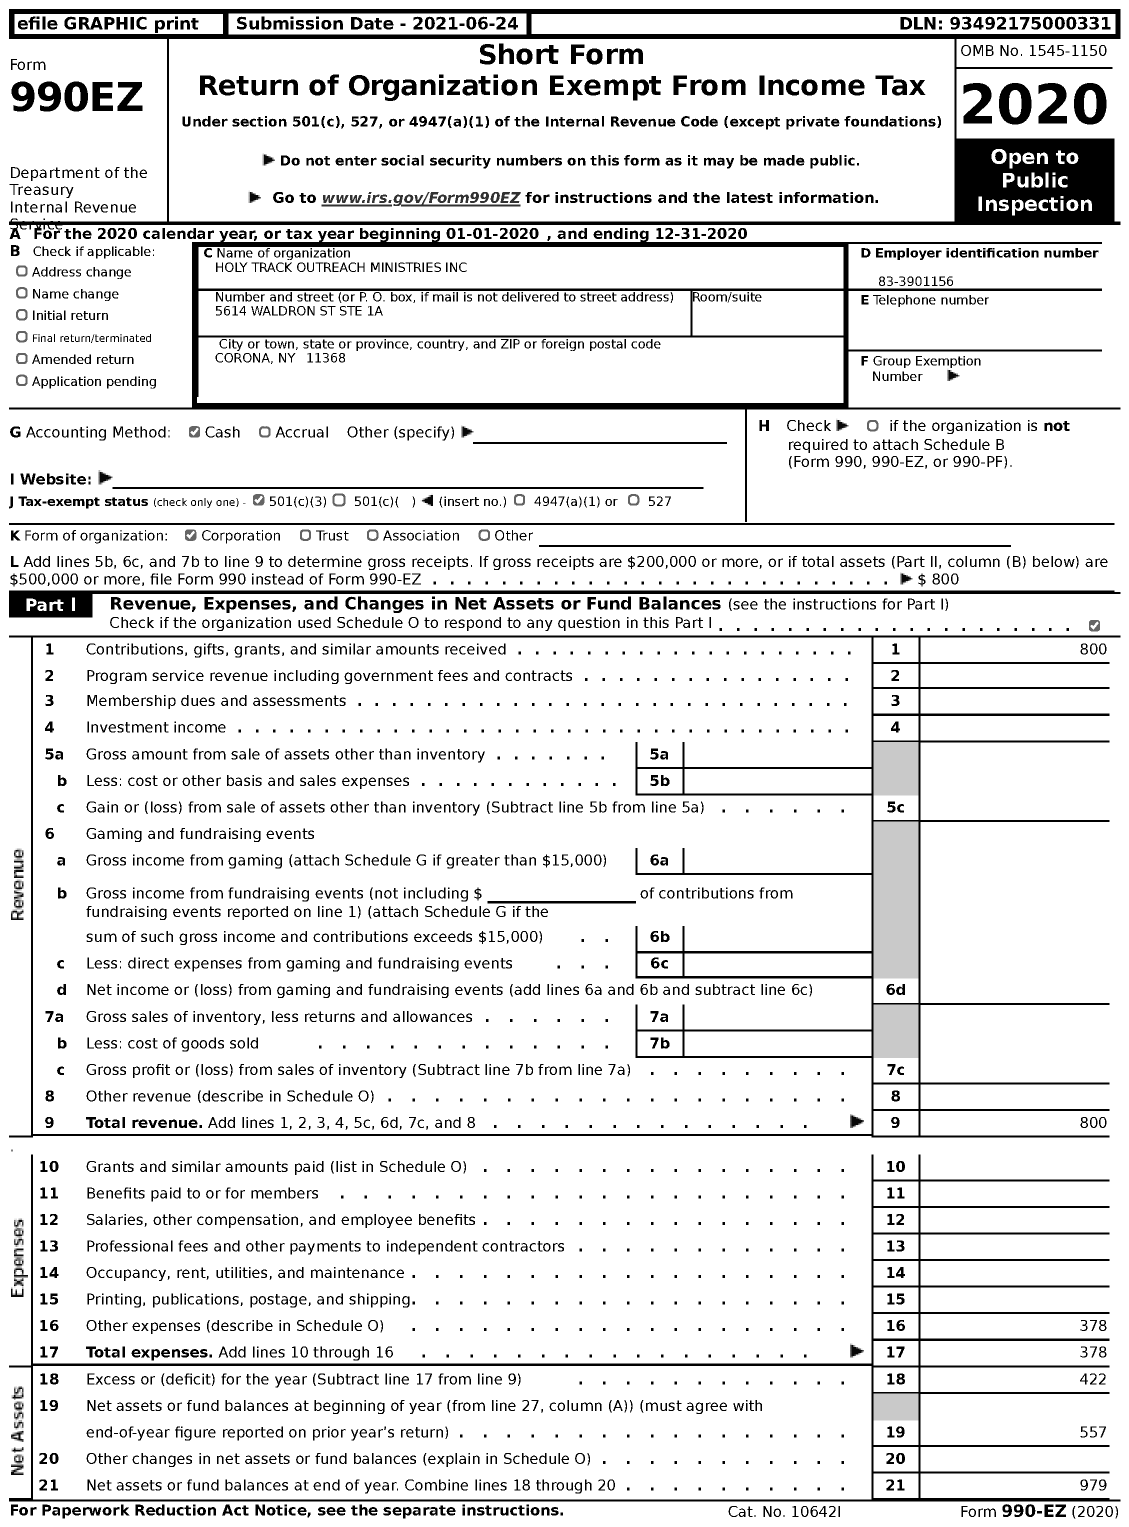 Image of first page of 2020 Form 990EZ for Holy Track Outreach Ministries